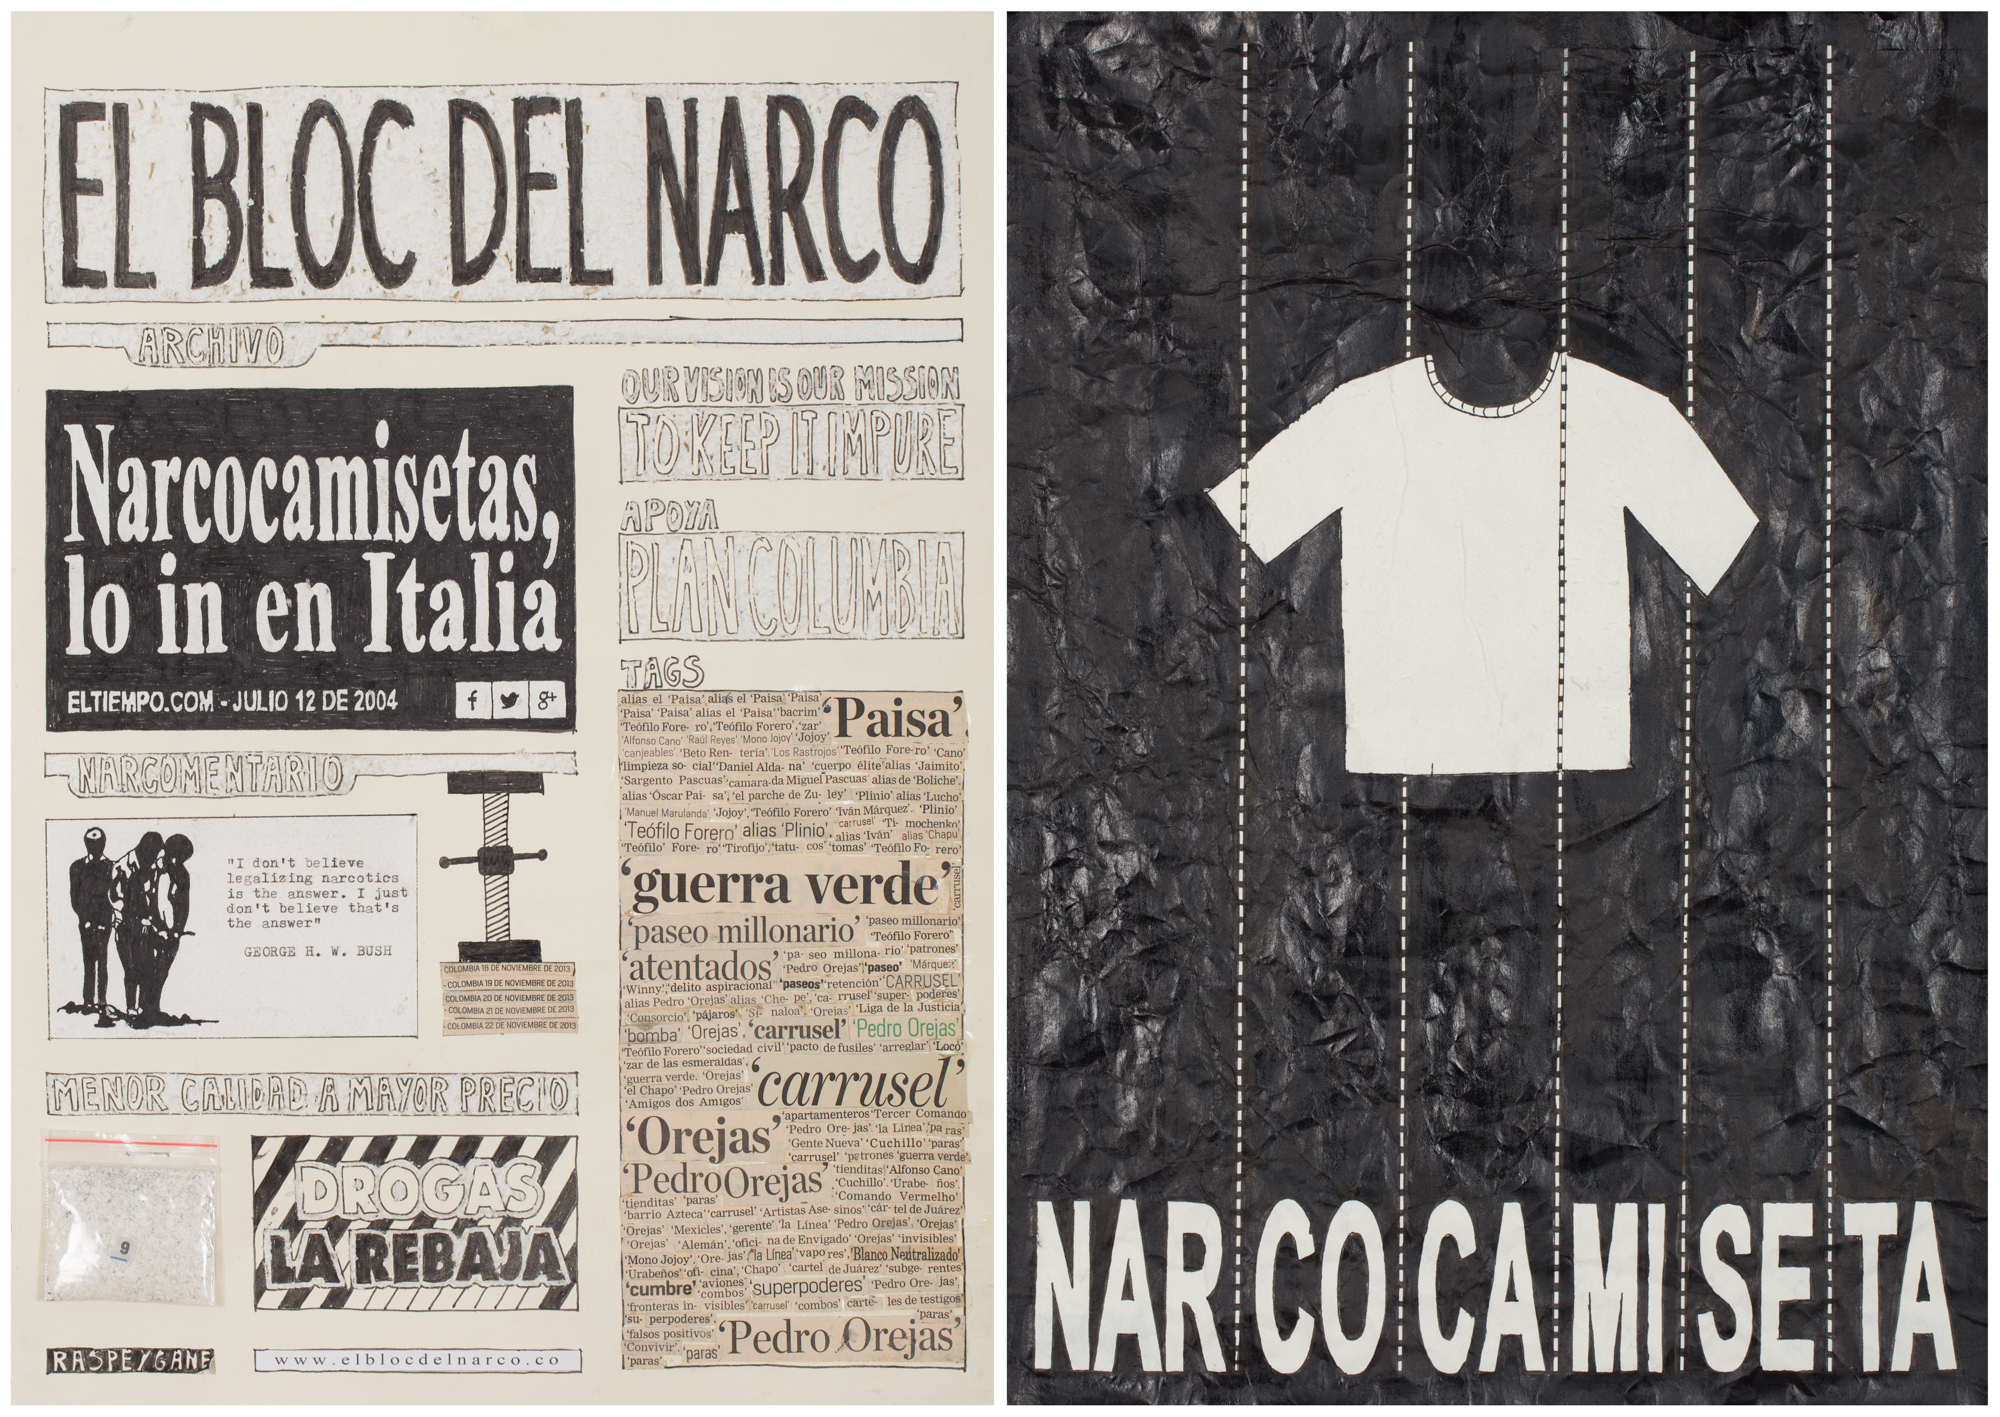 Camilo Restrepo. <em>El Bloc Del Narco #9</em>, 2016. Ink, water-soluble wax pastel, tape, glue, newspaper clippings, staples, plastic bag, paper dust and saliva on paper, 16 1/2 x 24 inches (41.9 x 61 cm)